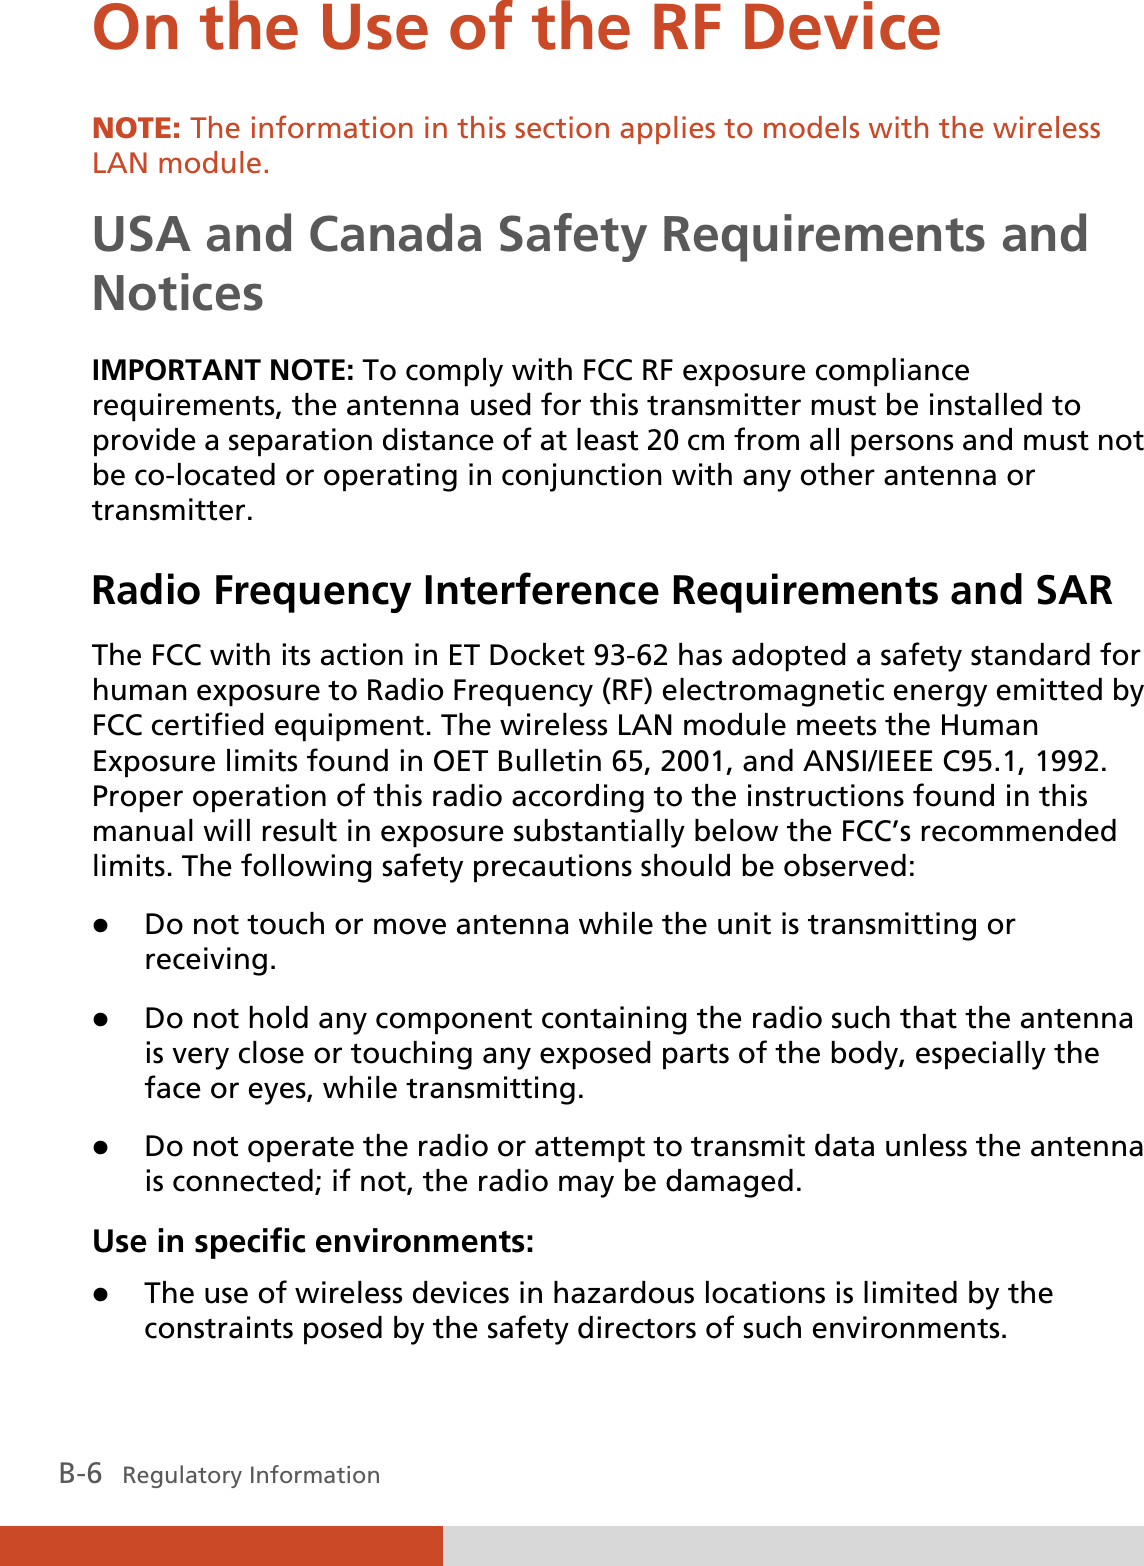  B-6   Regulatory Information On the Use of the RF Device NOTE: The information in this section applies to models with the wireless LAN module. USA and Canada Safety Requirements and Notices IMPORTANT NOTE: To comply with FCC RF exposure compliance requirements, the antenna used for this transmitter must be installed to provide a separation distance of at least 20 cm from all persons and must not be co-located or operating in conjunction with any other antenna or transmitter. Radio Frequency Interference Requirements and SAR The FCC with its action in ET Docket 93-62 has adopted a safety standard for human exposure to Radio Frequency (RF) electromagnetic energy emitted by FCC certified equipment. The wireless LAN module meets the Human Exposure limits found in OET Bulletin 65, 2001, and ANSI/IEEE C95.1, 1992. Proper operation of this radio according to the instructions found in this manual will result in exposure substantially below the FCC’s recommended limits. The following safety precautions should be observed: z Do not touch or move antenna while the unit is transmitting or receiving. z Do not hold any component containing the radio such that the antenna is very close or touching any exposed parts of the body, especially the face or eyes, while transmitting. z Do not operate the radio or attempt to transmit data unless the antenna is connected; if not, the radio may be damaged. Use in specific environments: z The use of wireless devices in hazardous locations is limited by the constraints posed by the safety directors of such environments. 